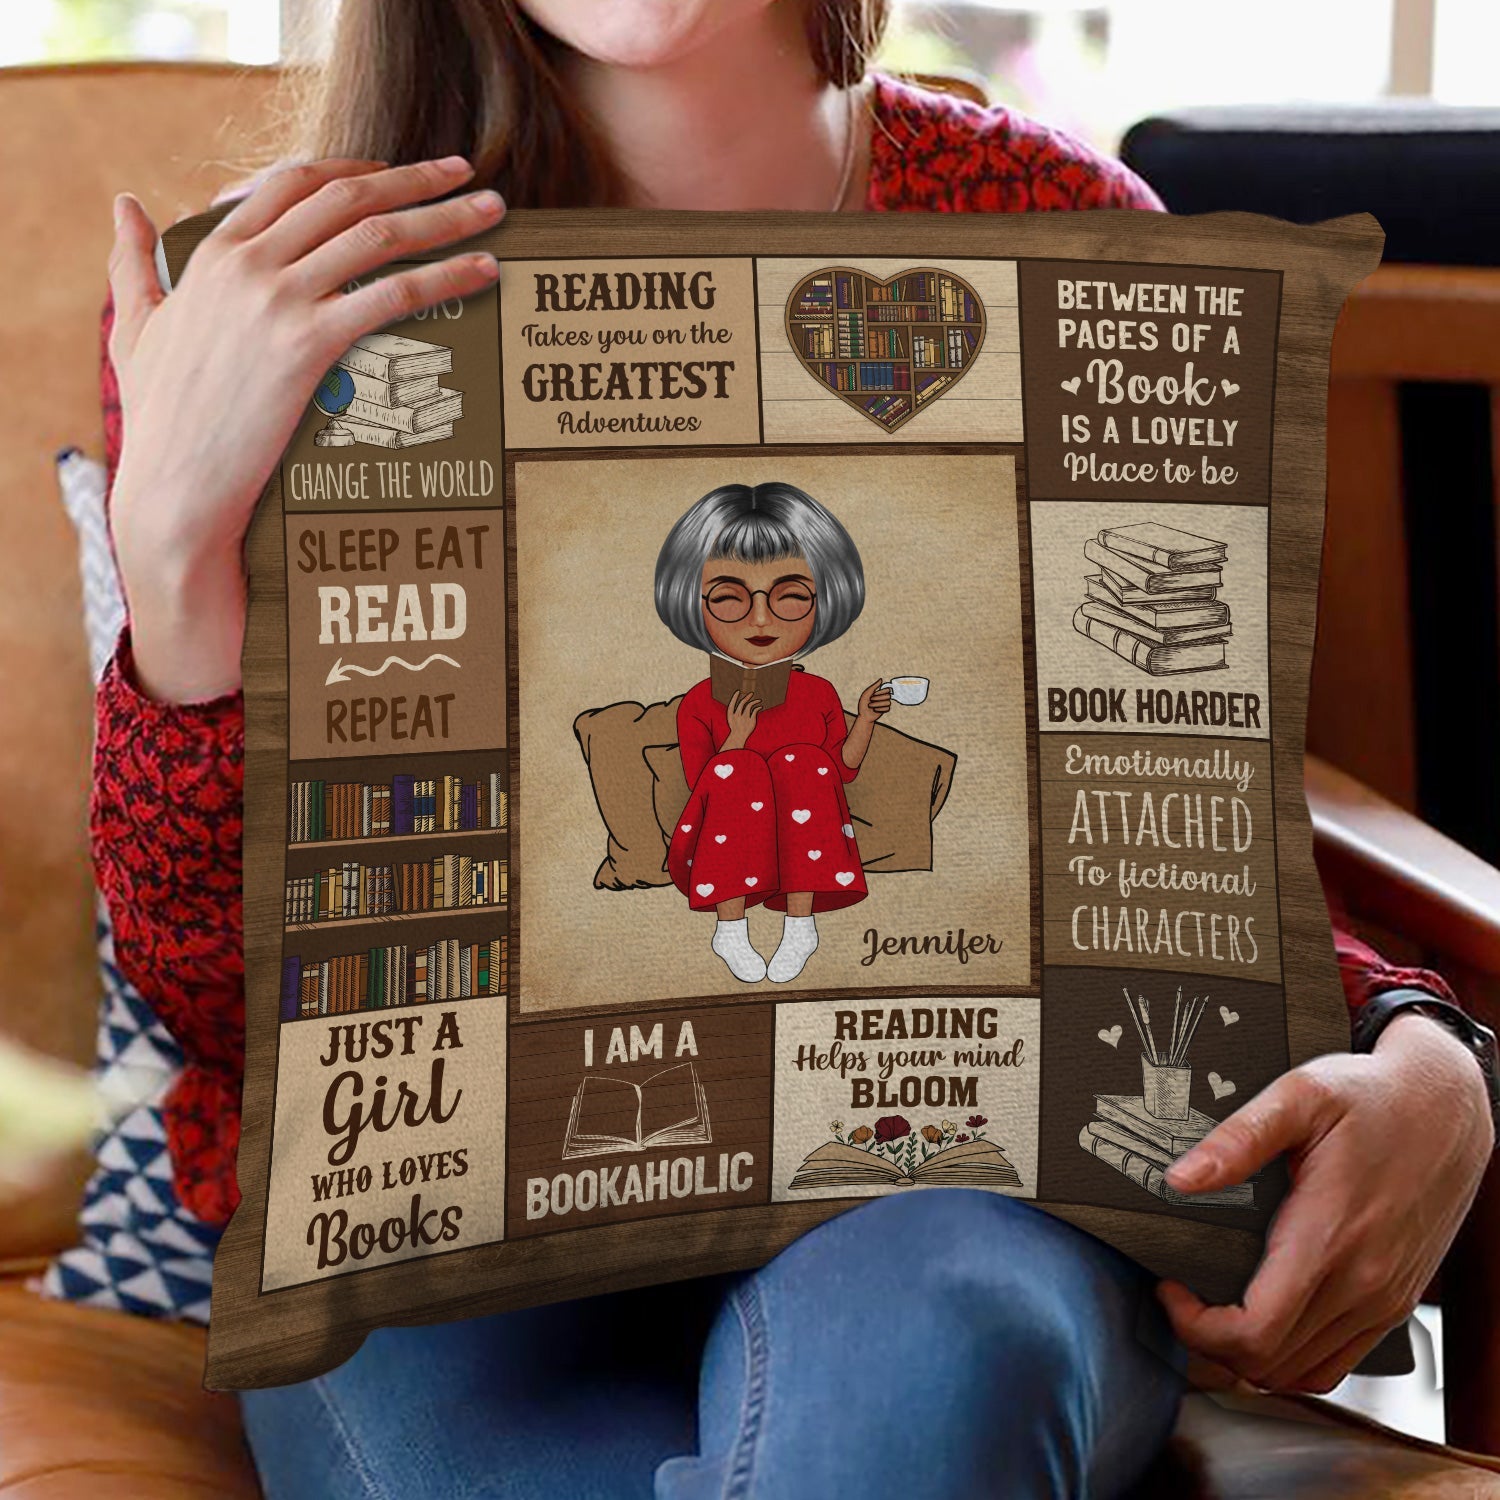 Reading My Reading Pillow I'm A Bookaholic - Gift For Book Lovers - Personalized Pillow